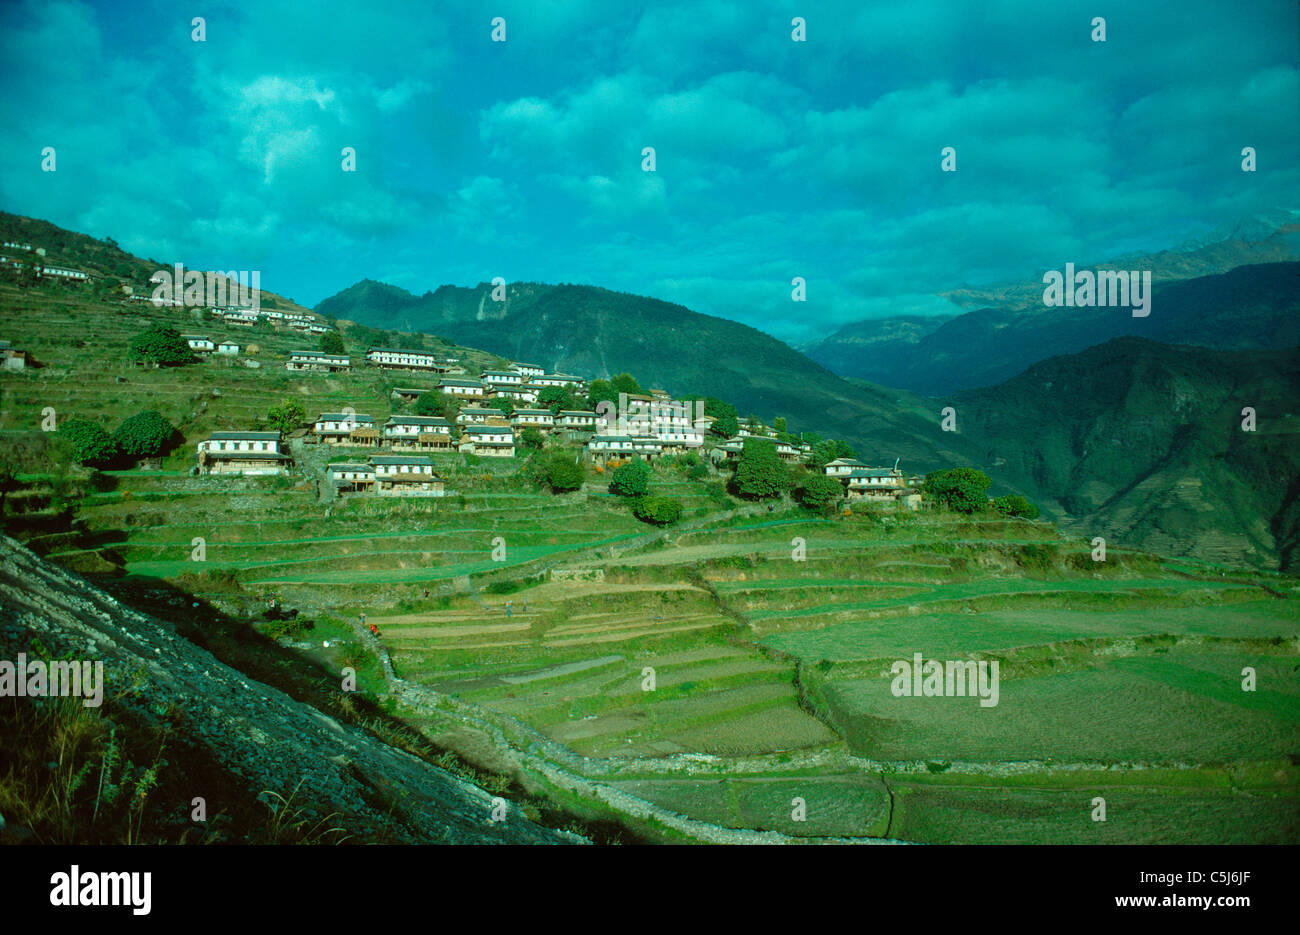 The Gurung village of Ghandrung on its ridge in the foothills of the Annapurnas, Nepal Himalaya. Stock Photo